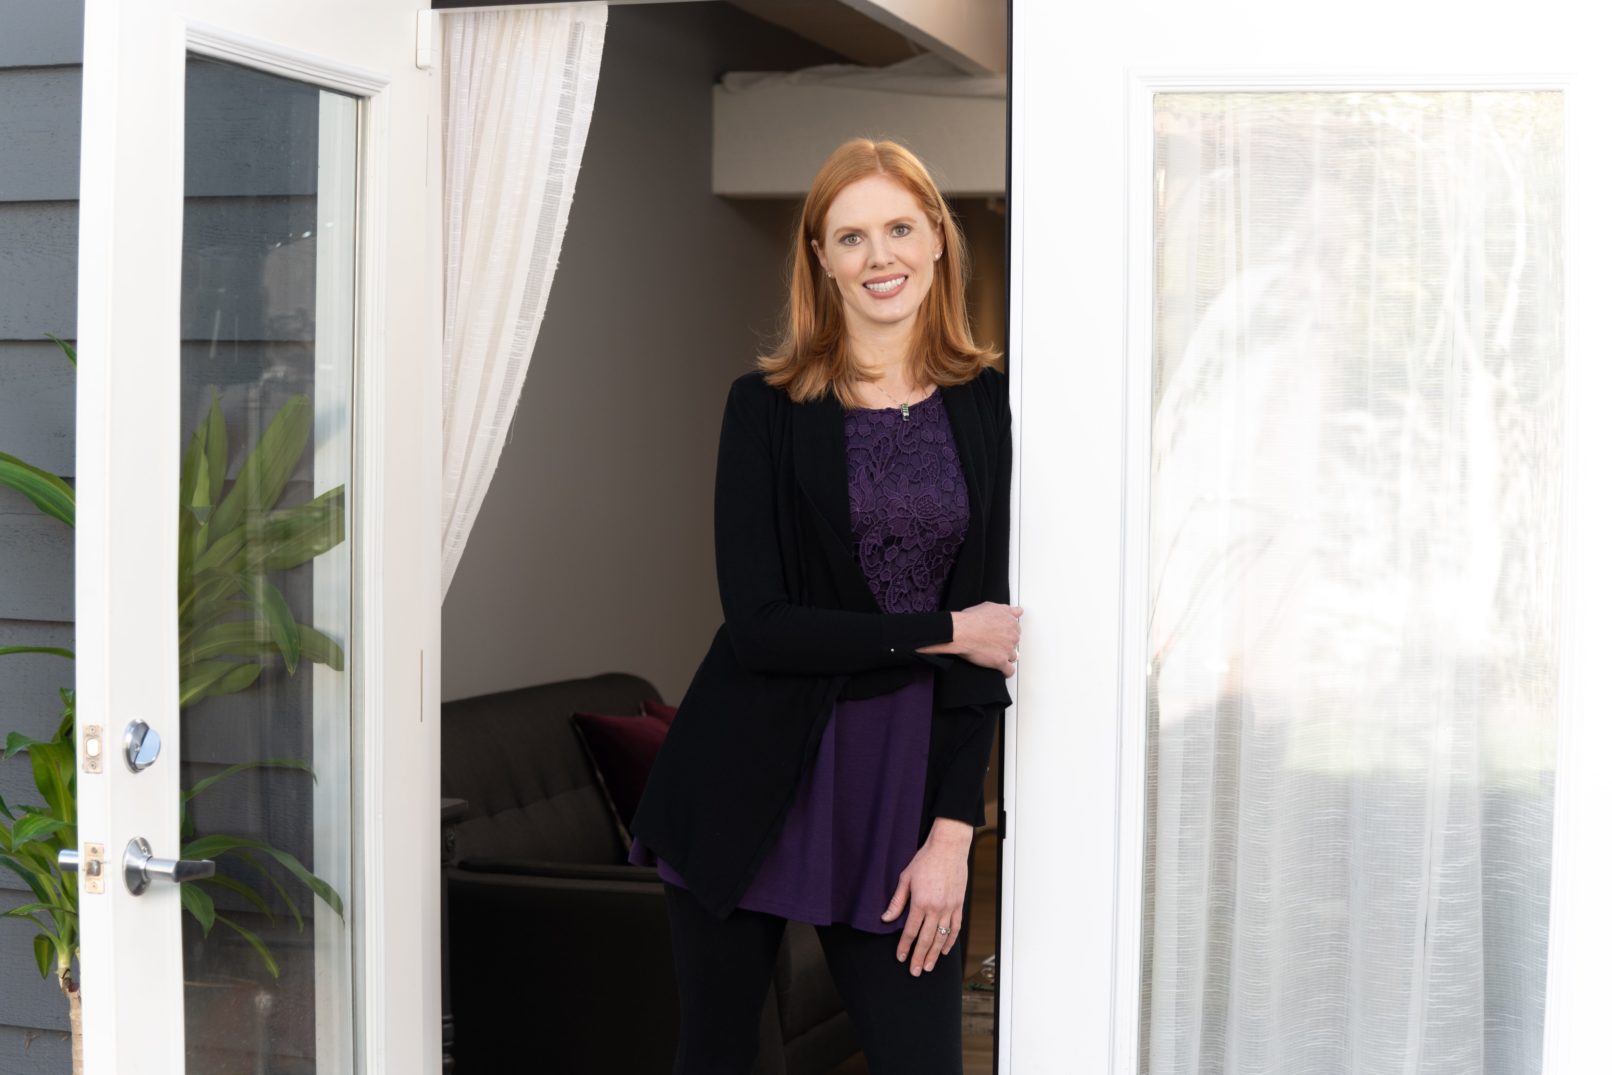 Portrait-Personal Branding photo of a redhead woman wearing a purple undershirt with a black sweater leaning in an open white doorway of a home.